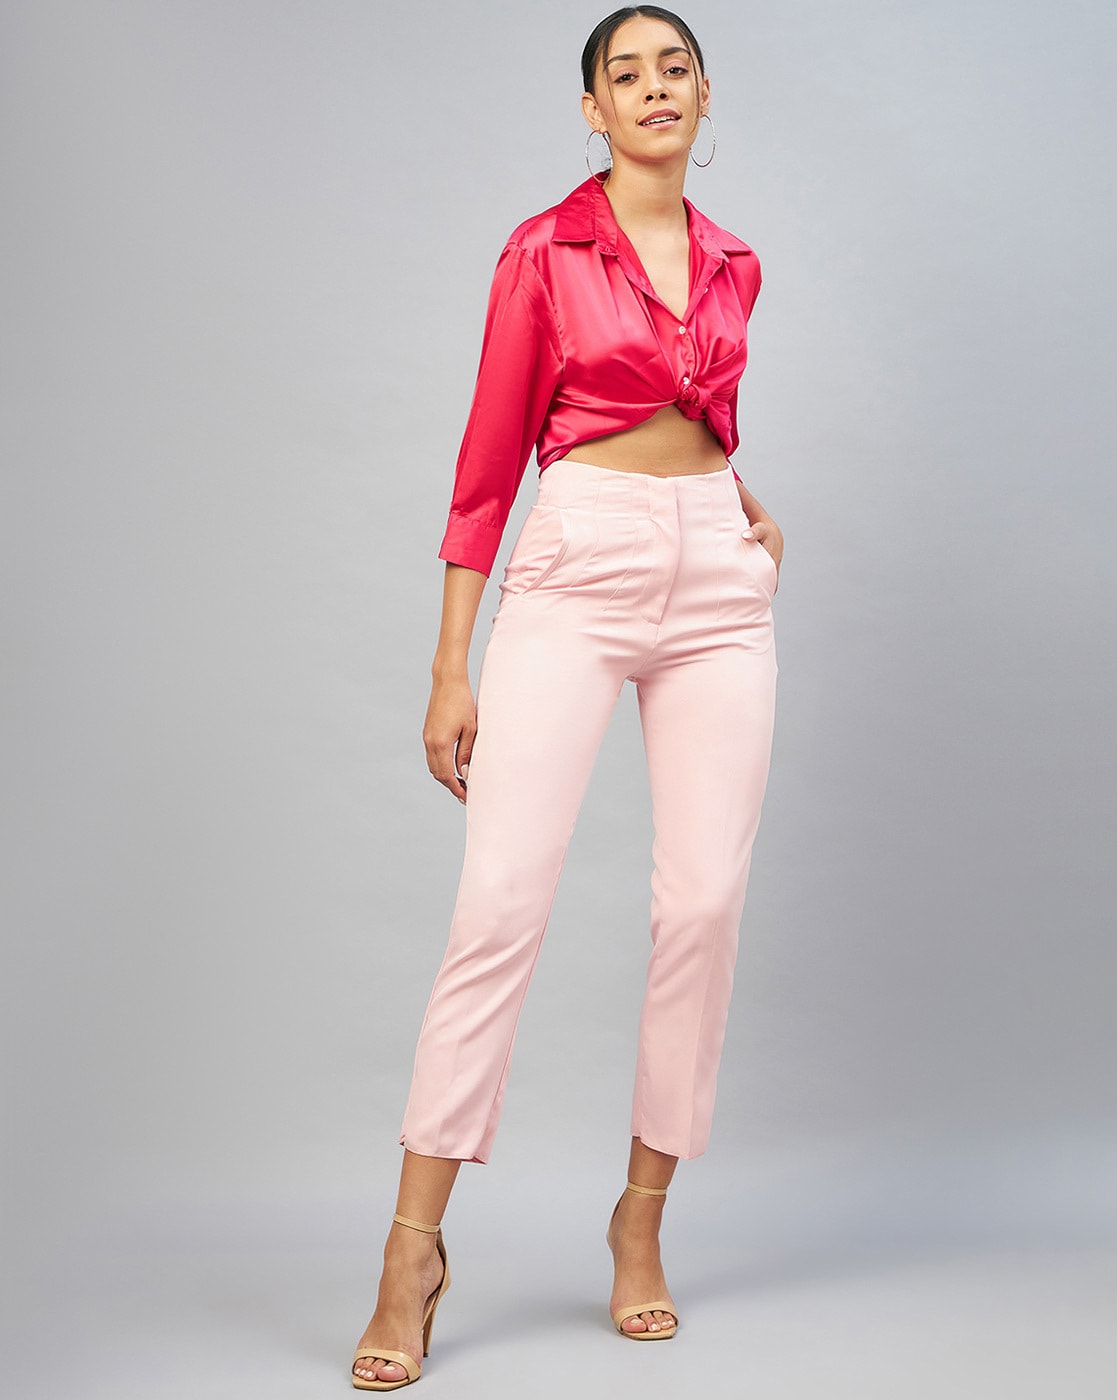 Zara Françoise Full Length Trousers in Pink  UFO No More